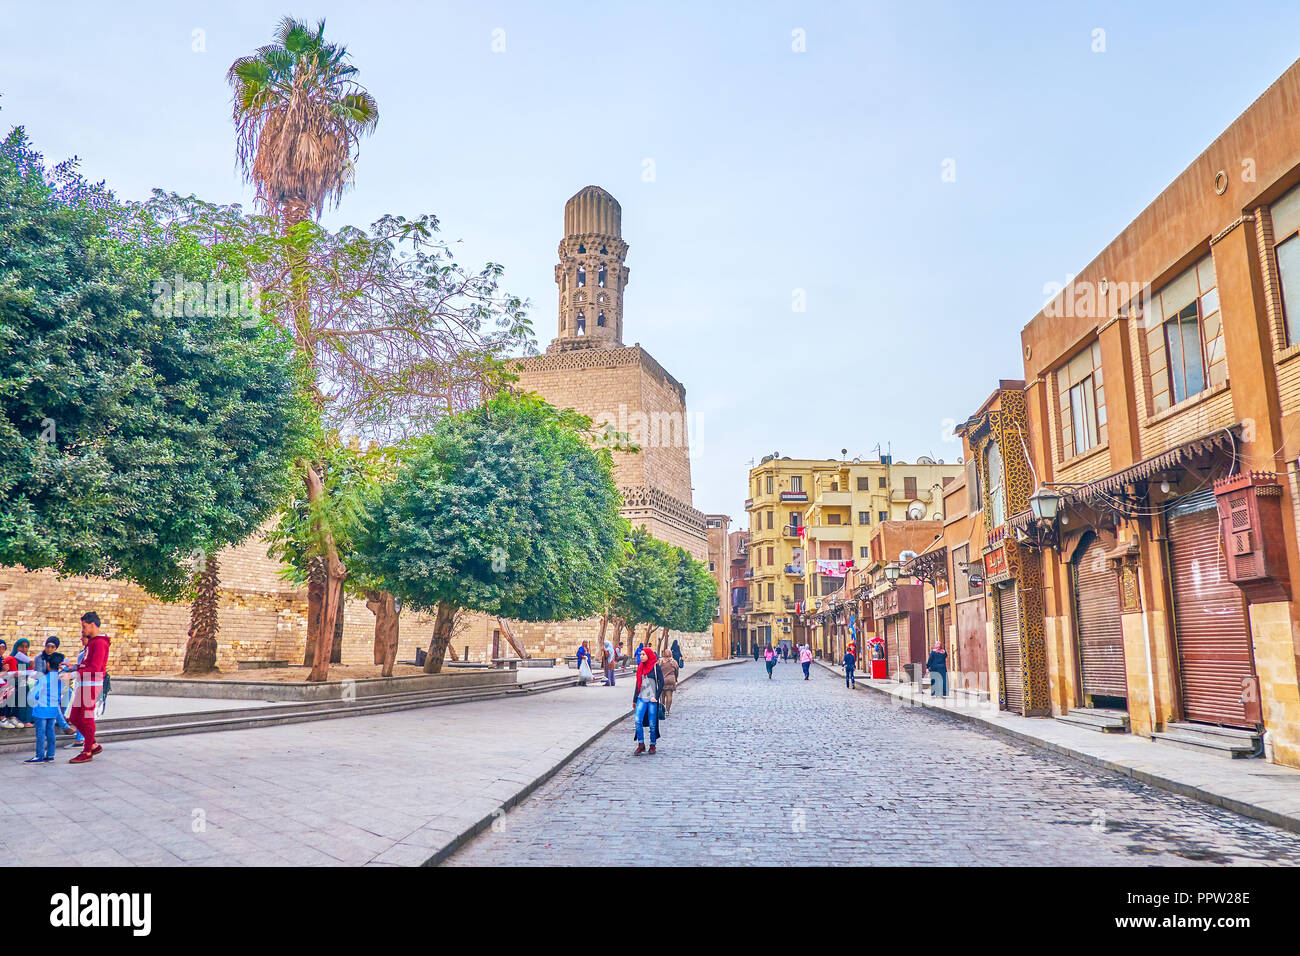 CAIRO, EGYPT - DECEMBER 23, 2017: The early morning in Al-Muizz Street with closed shops, cafes and walking teenagers, on December 23 in Cairo Stock Photo